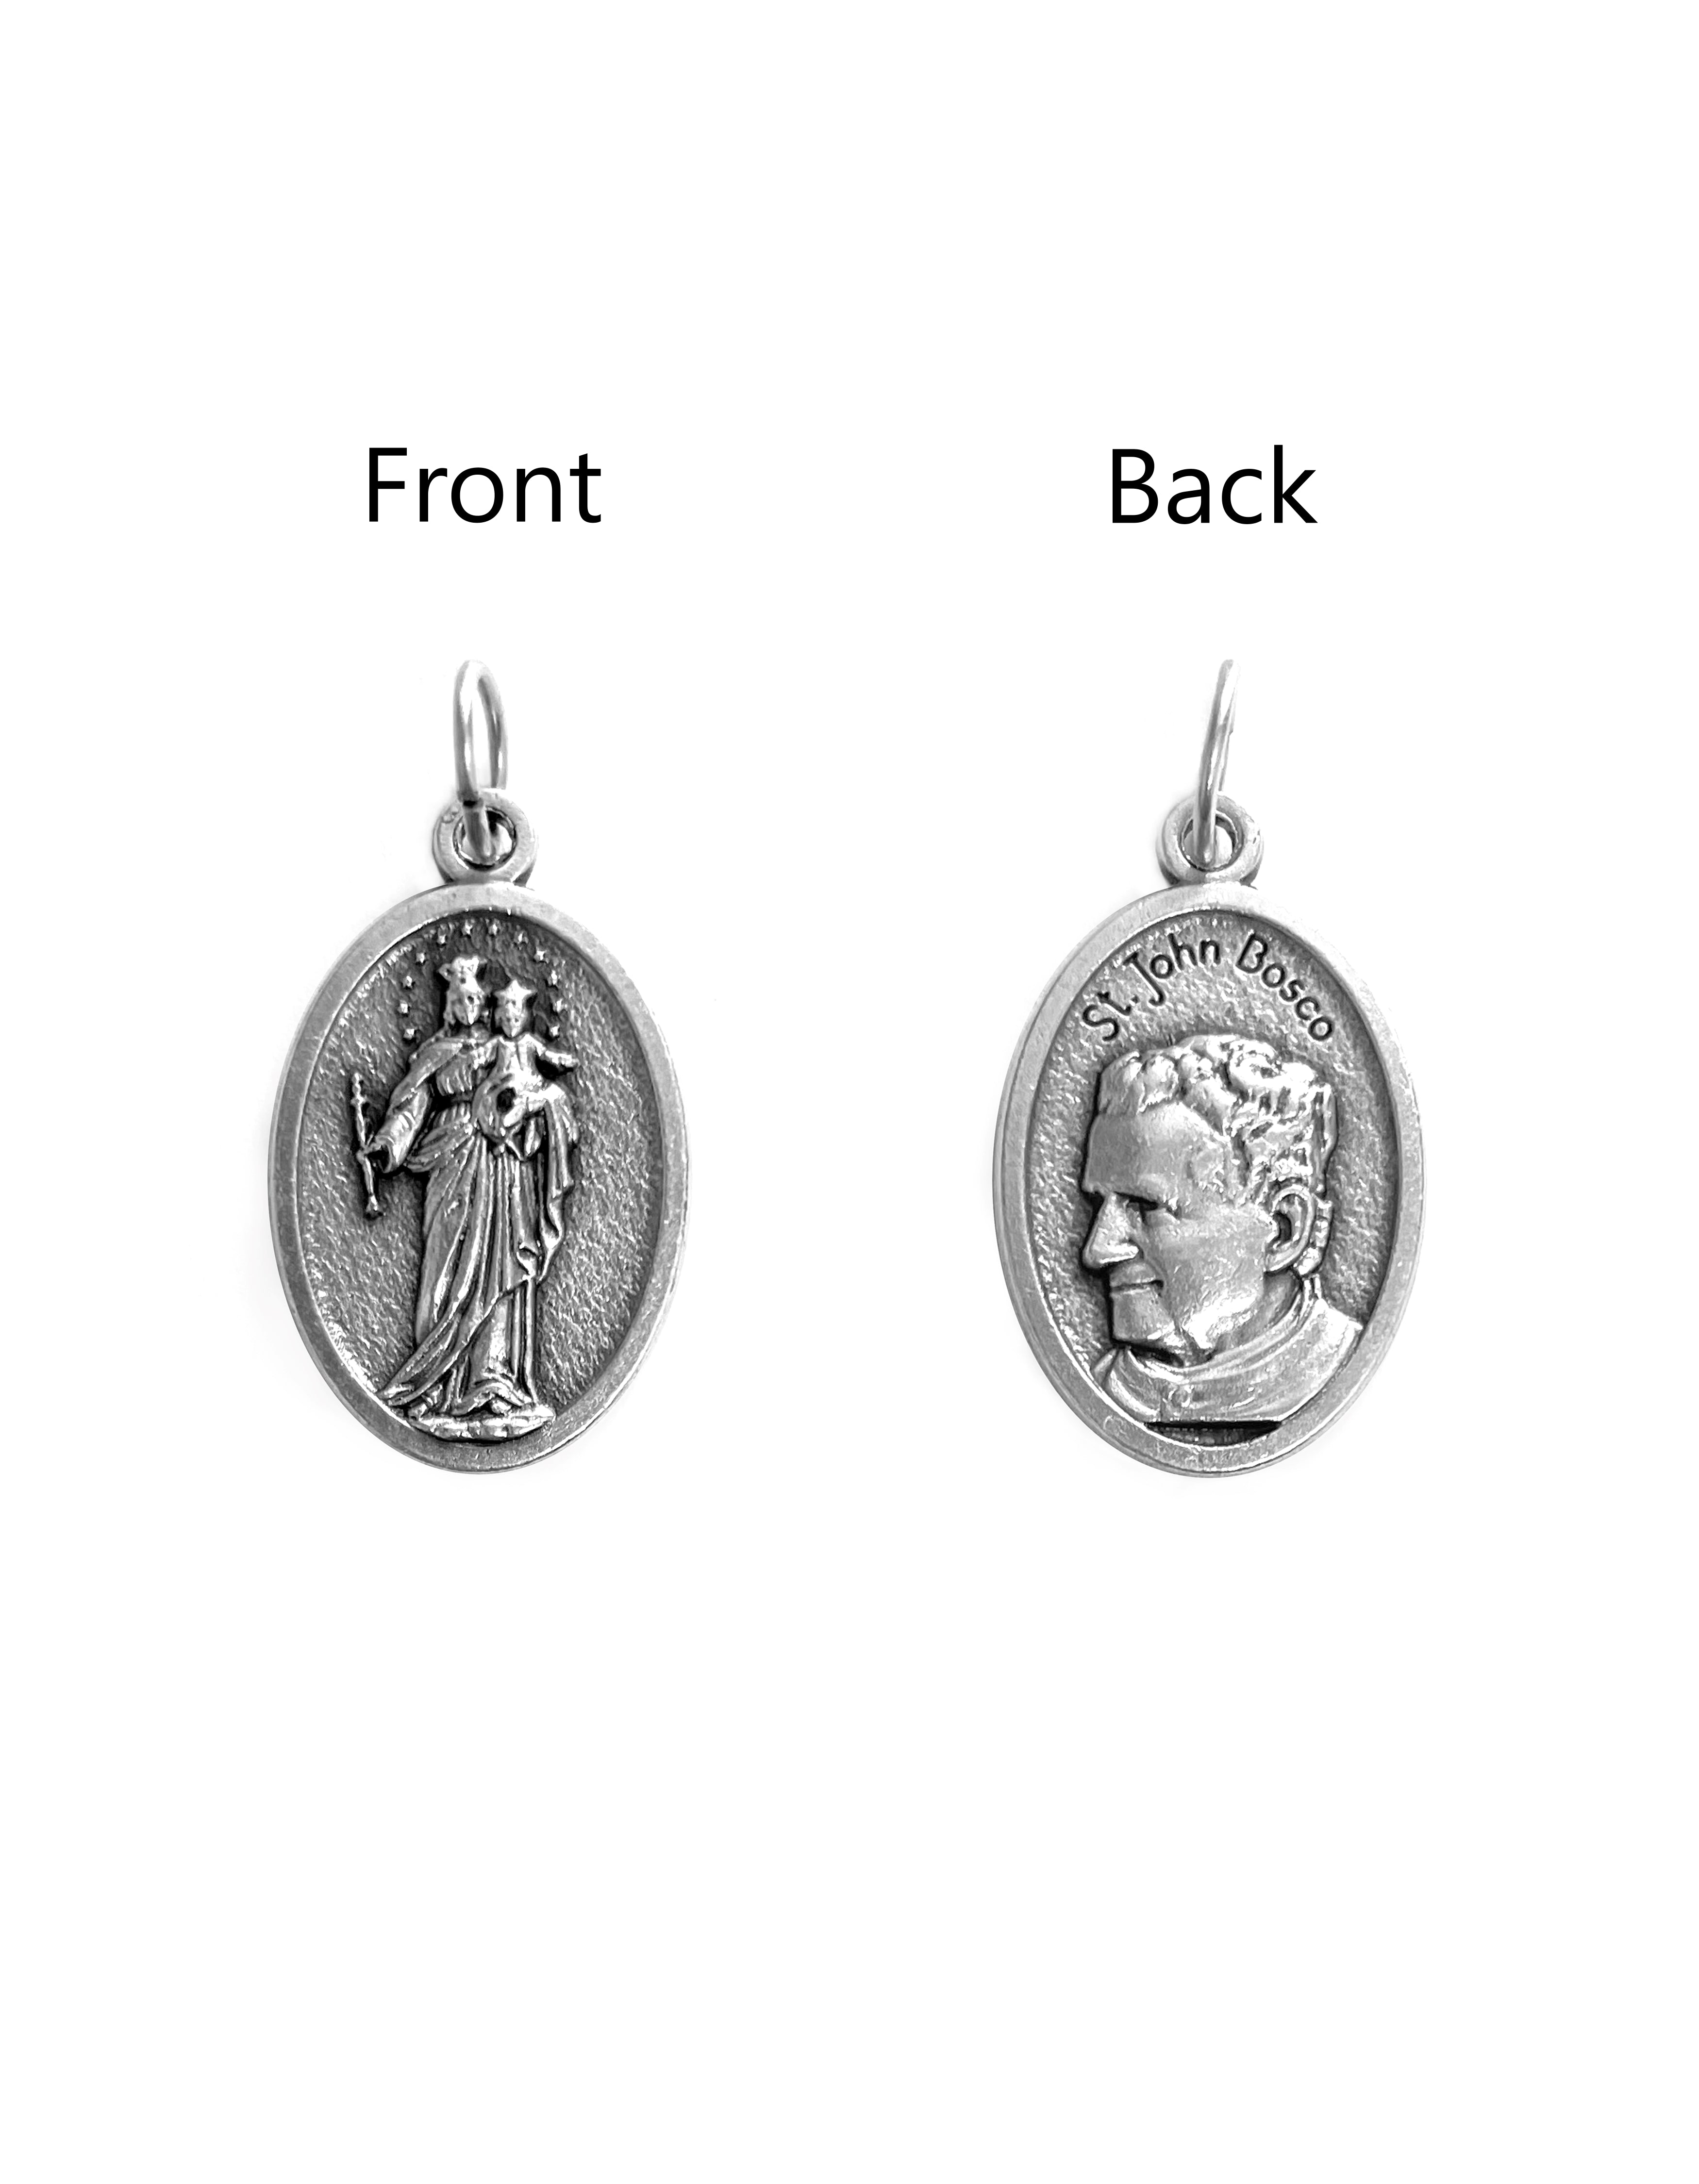 Saints Medals in oxidized silver made in Italy 1.0" x 0.7"